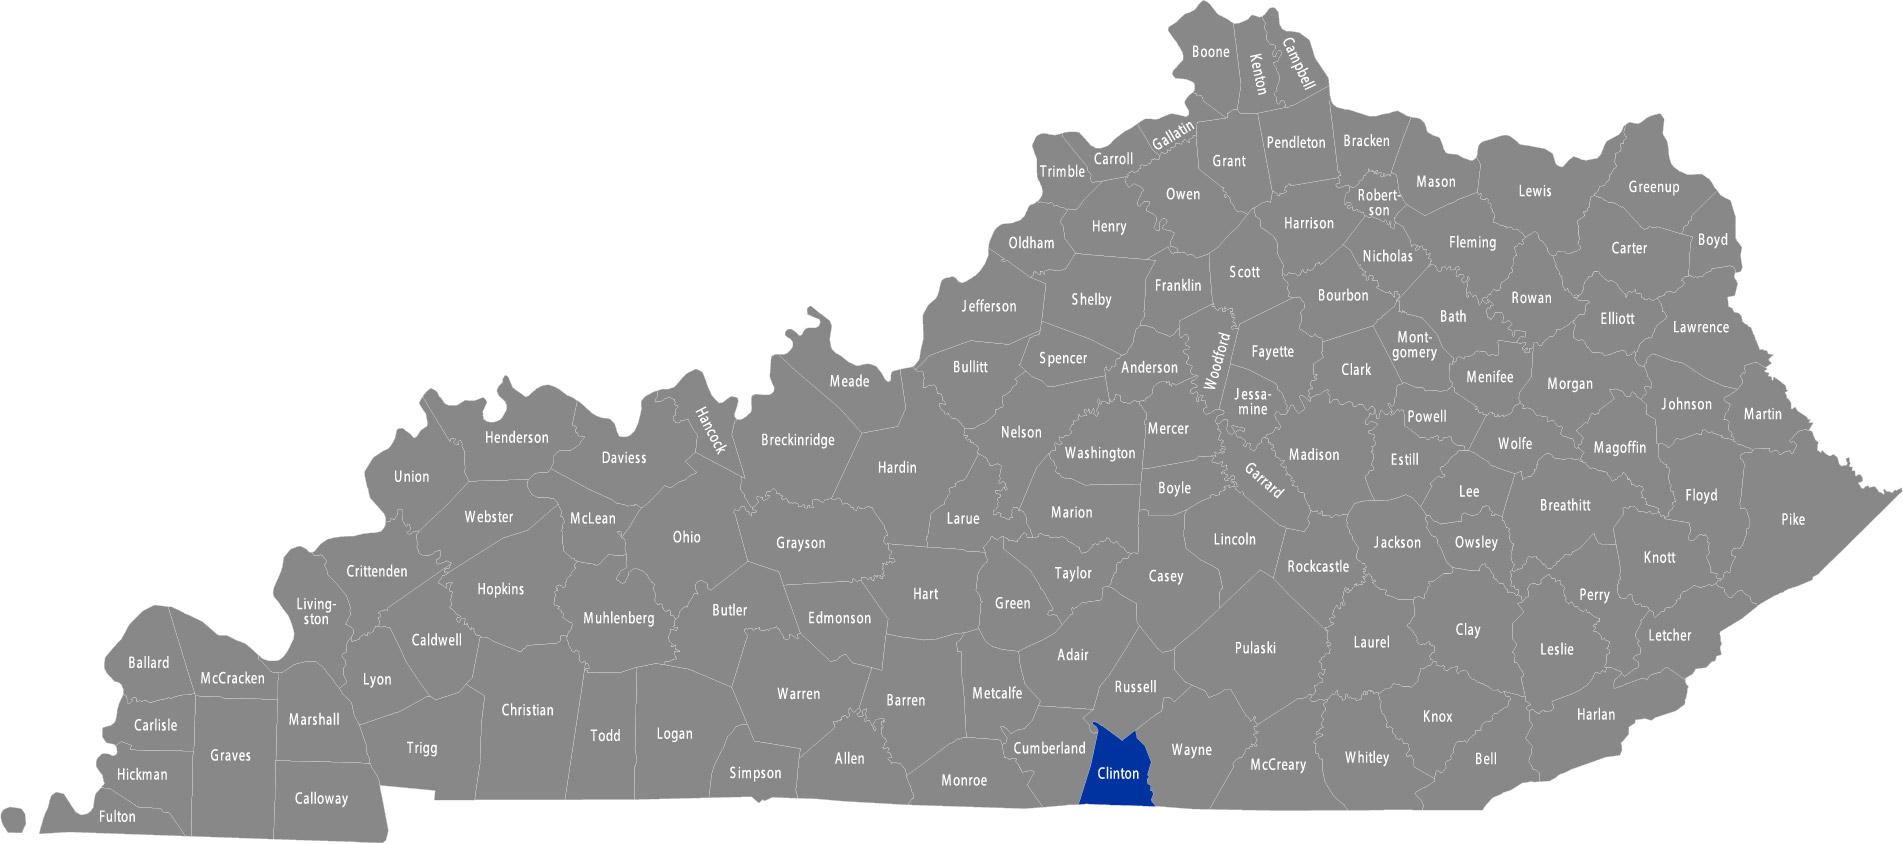 State of Kentucky with Clinton county highlighted